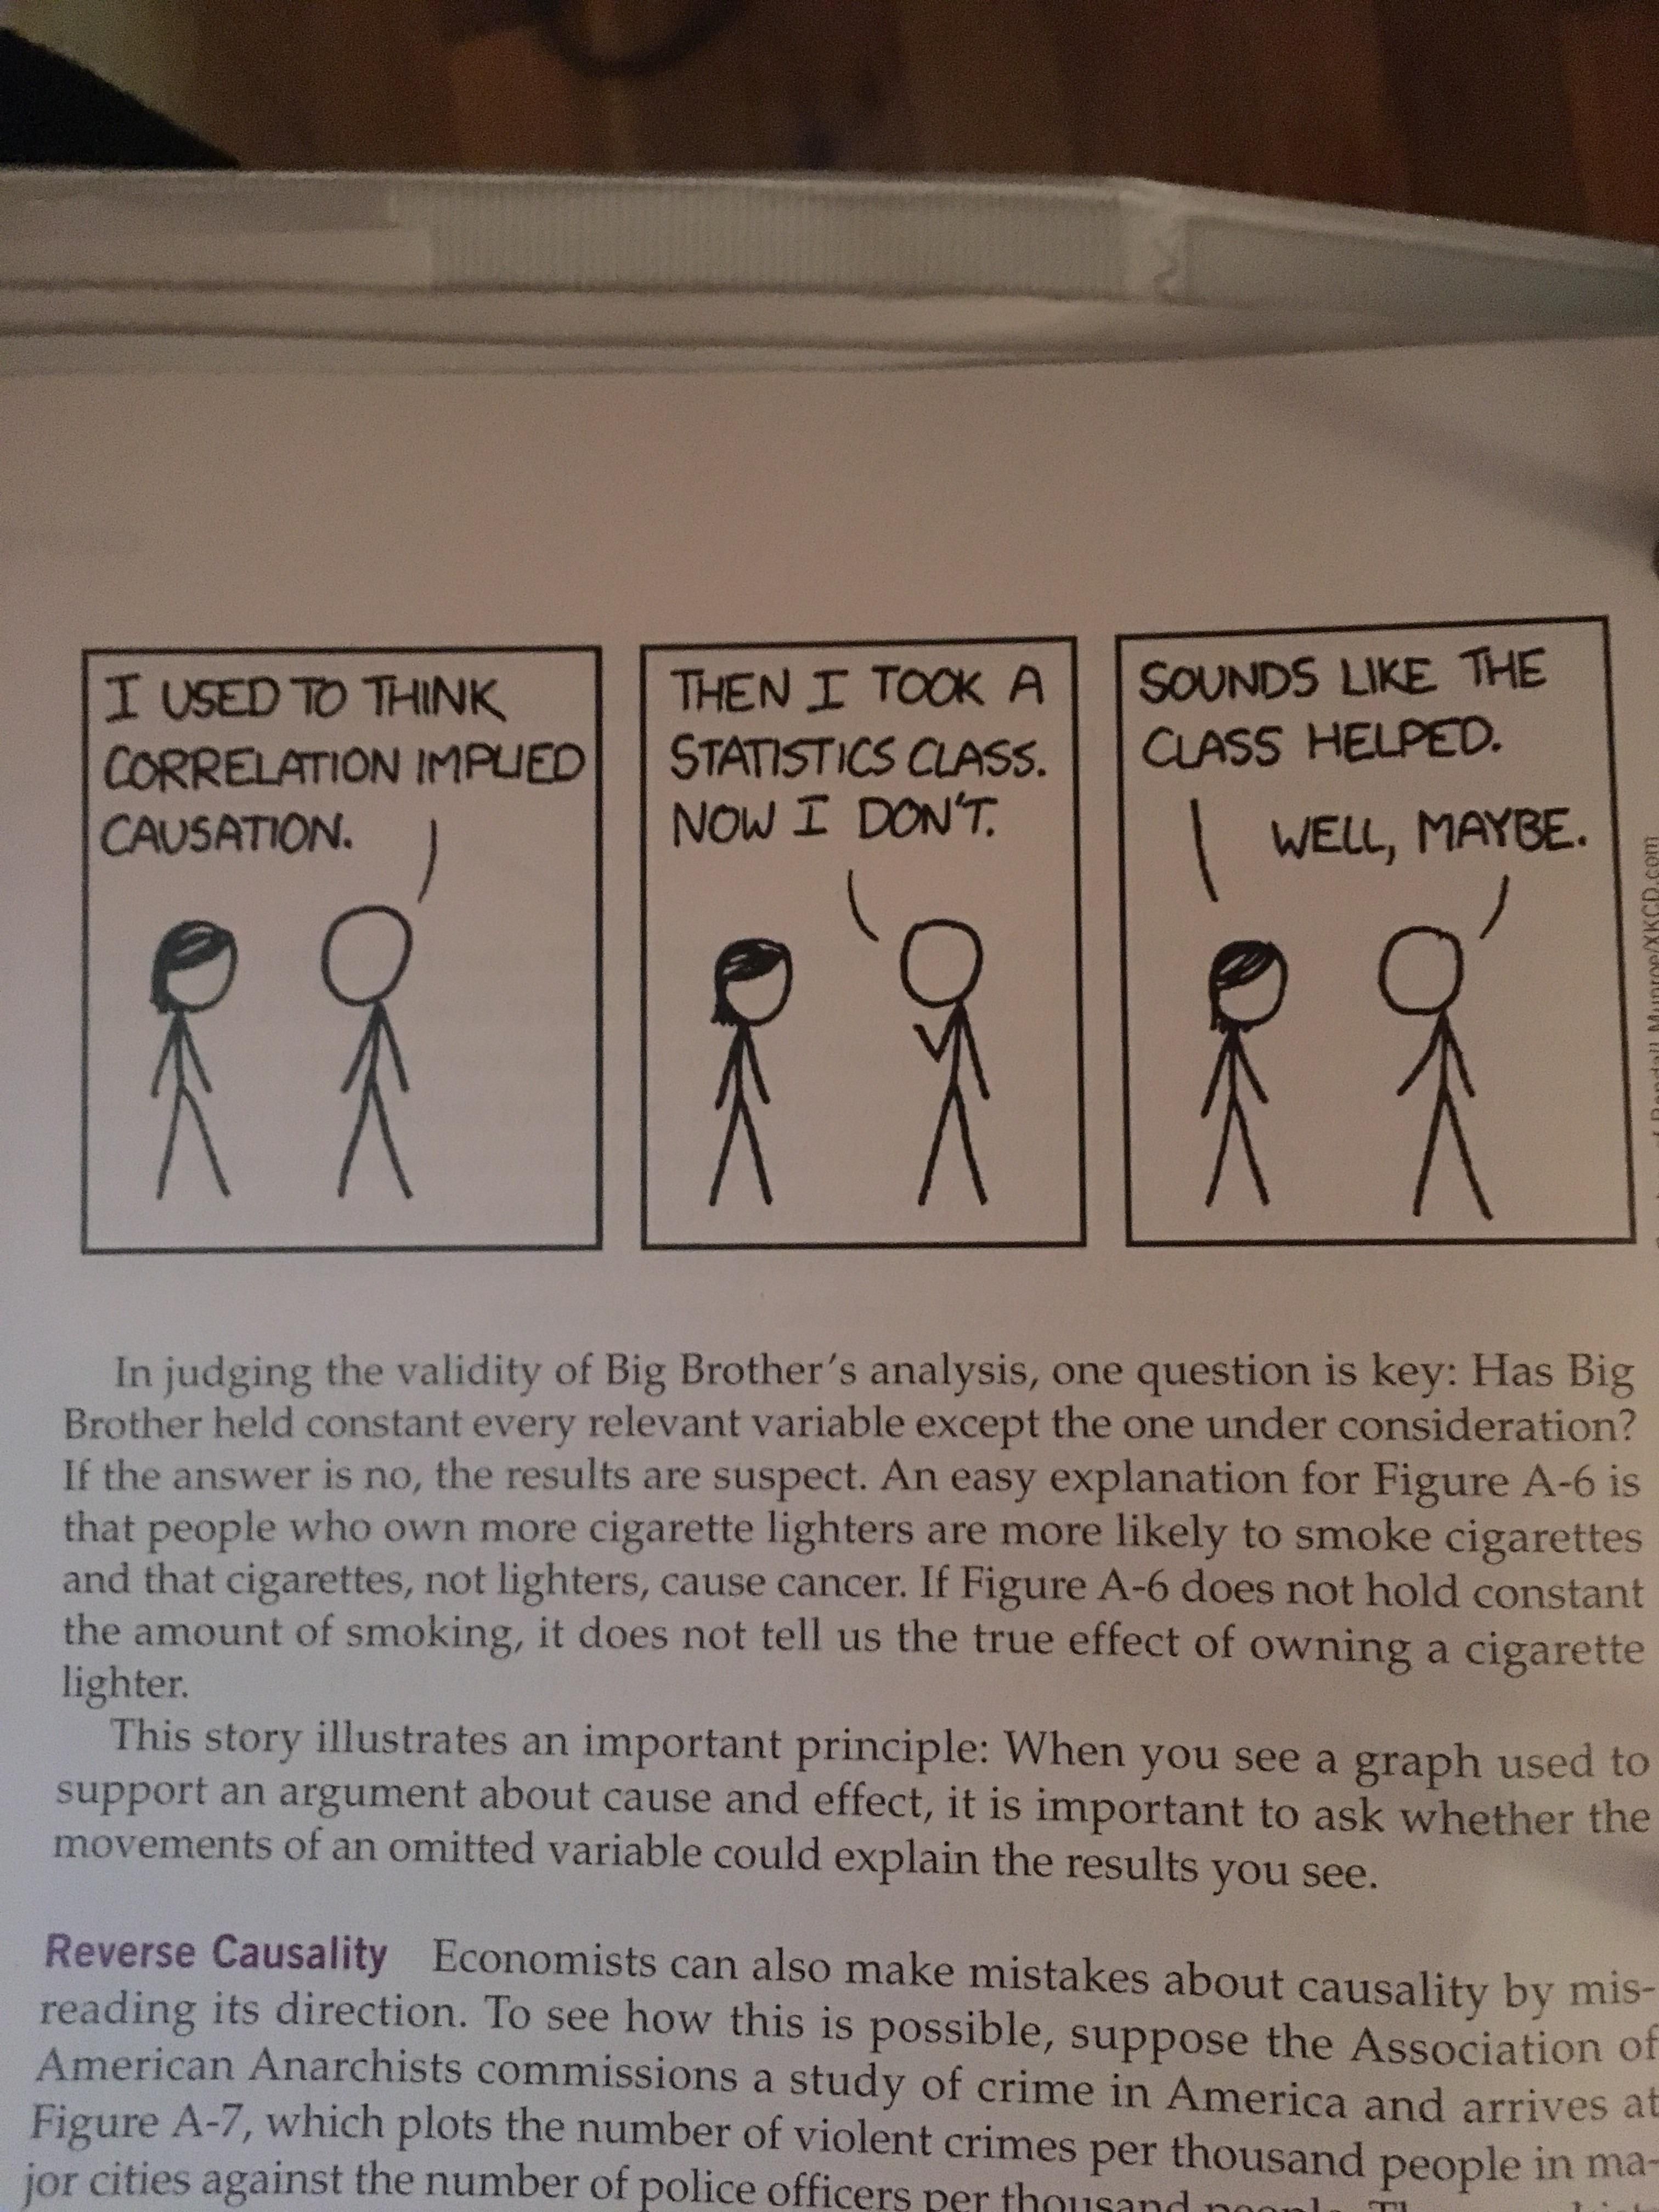 There’s an XKCD for everything... even in Econ books.